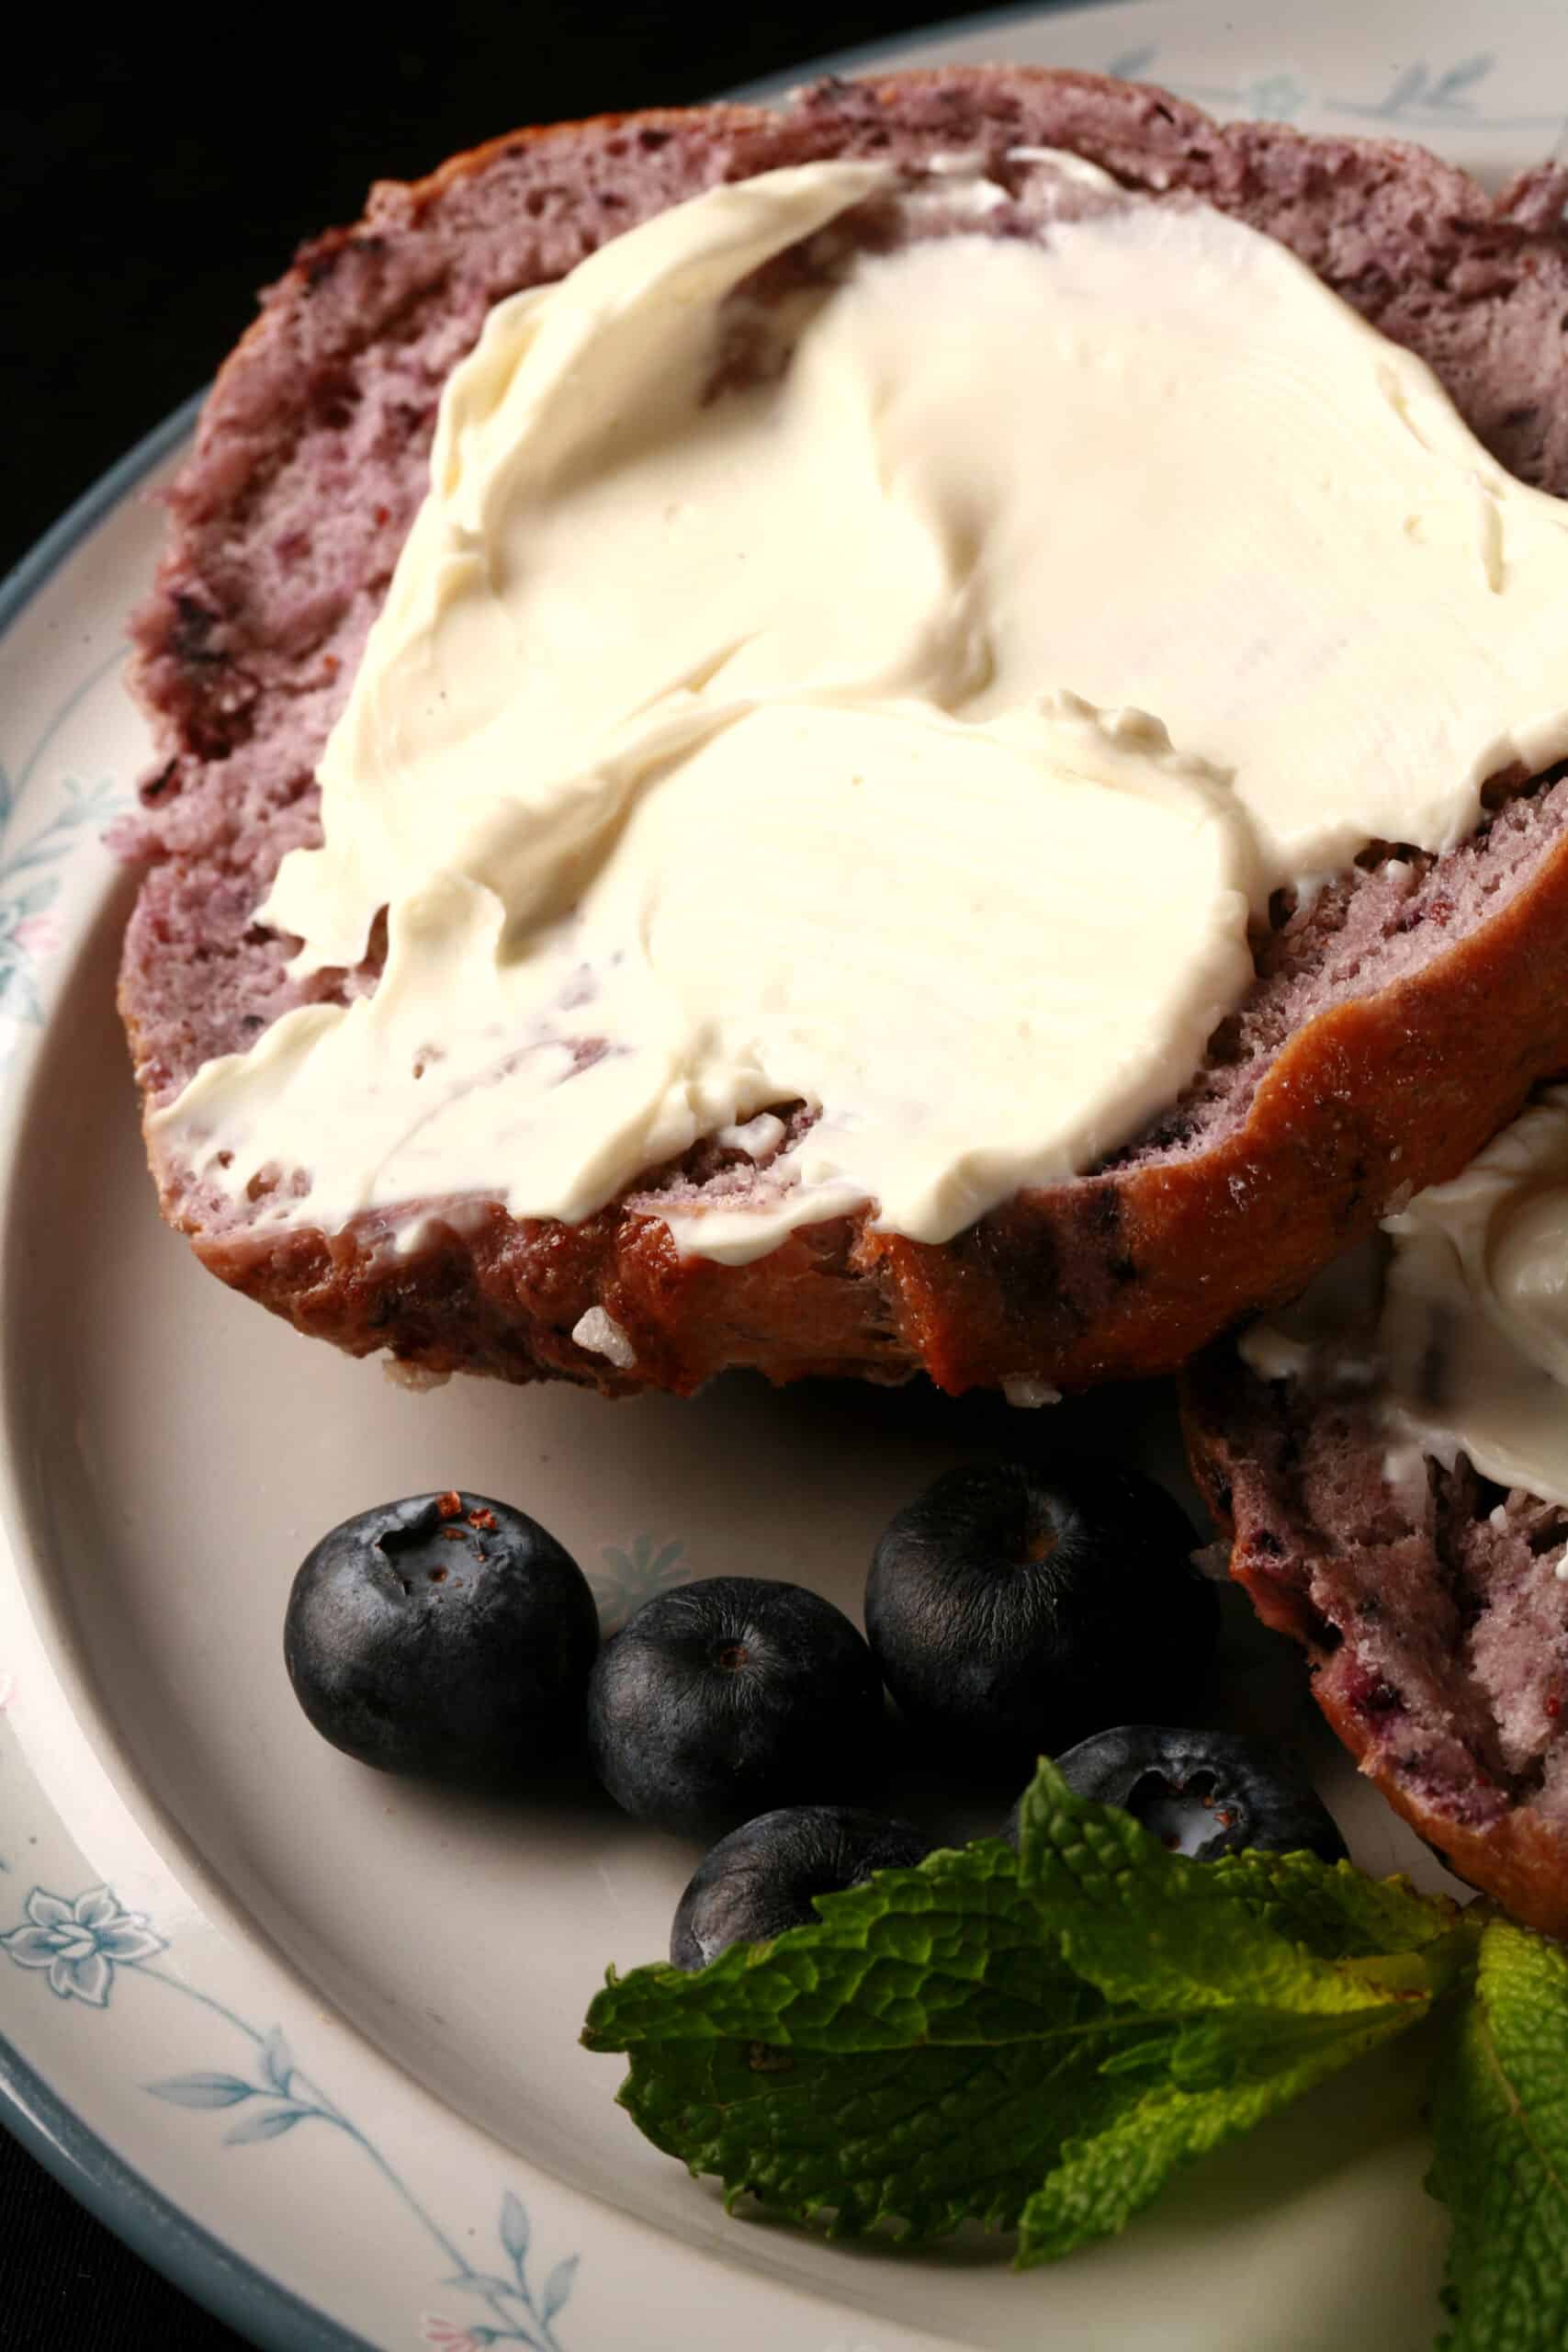 A split open blueberry bagel, spread with cream cheese.